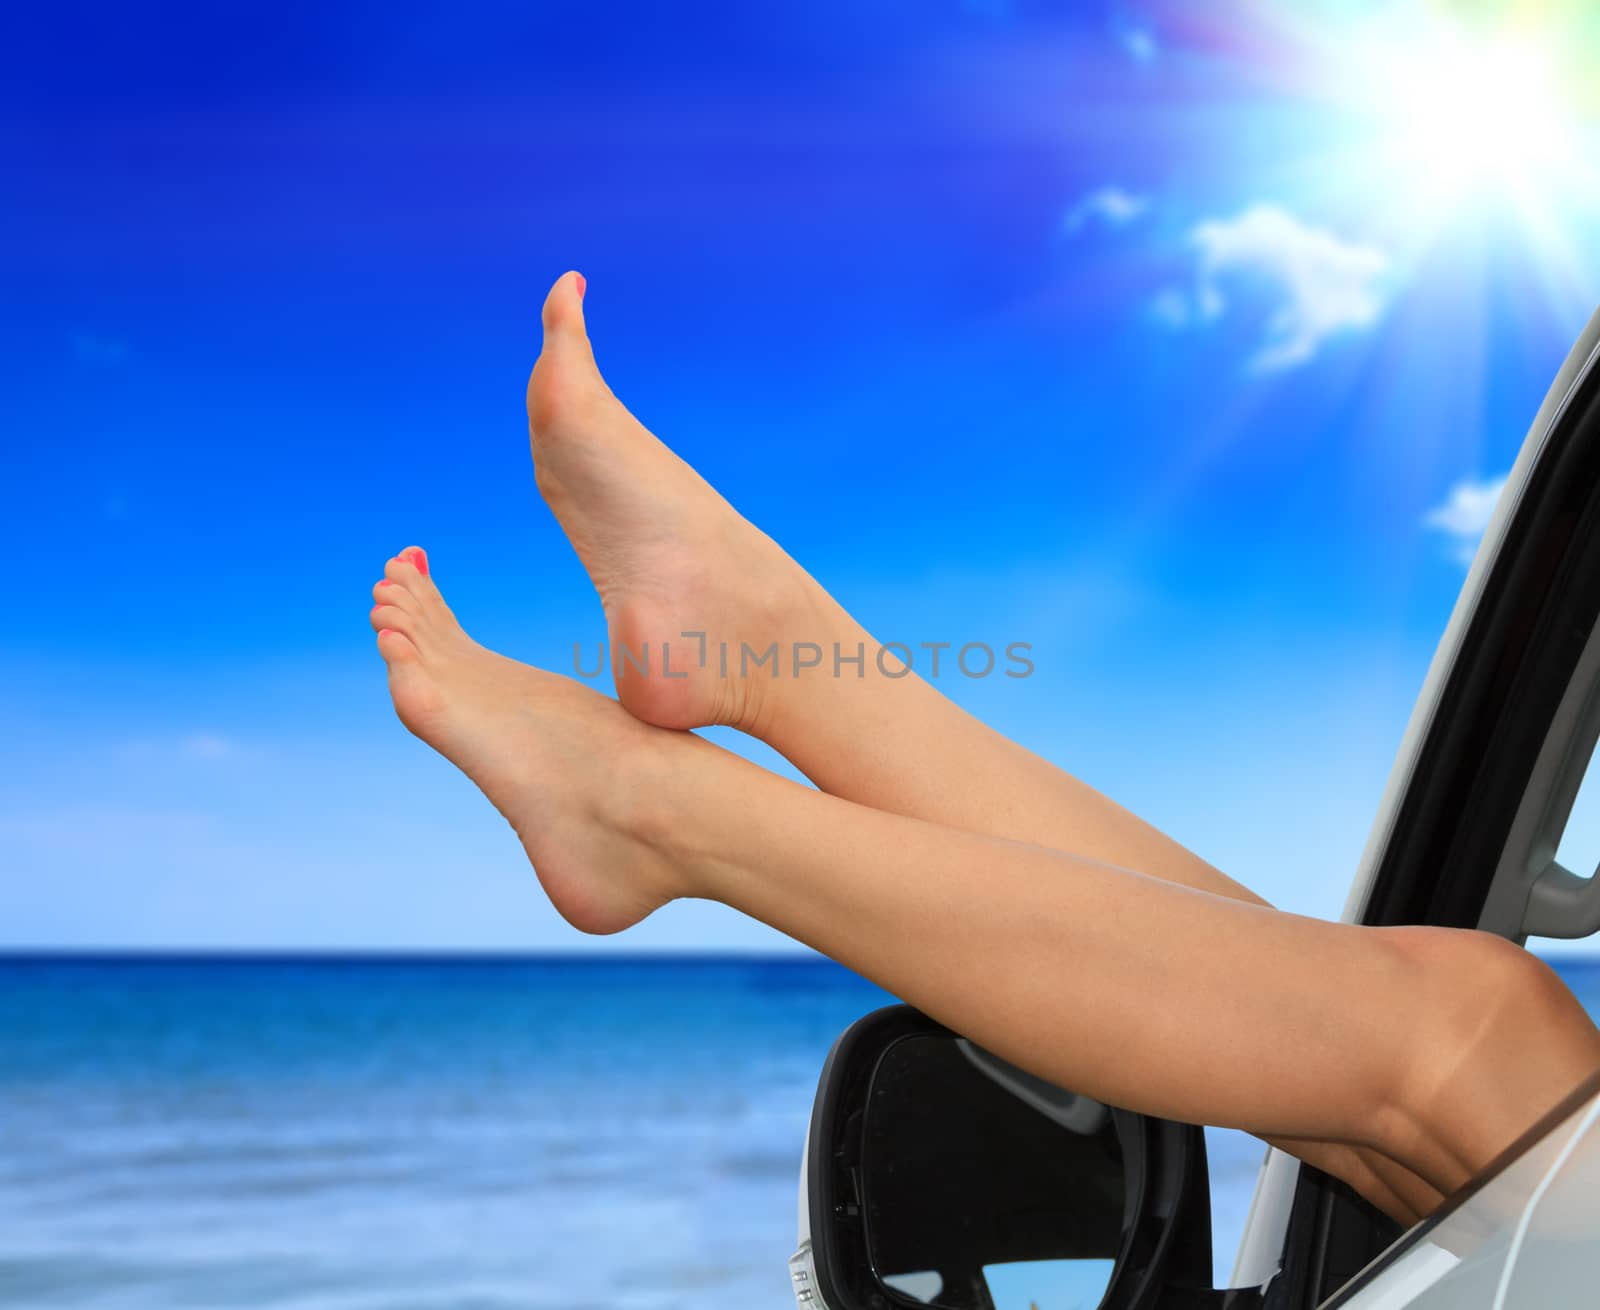 Beaitiful female legs against the sea and summer blue sky. Vacation, travel summer holidays concept. Woman shows her slim legs from the car window